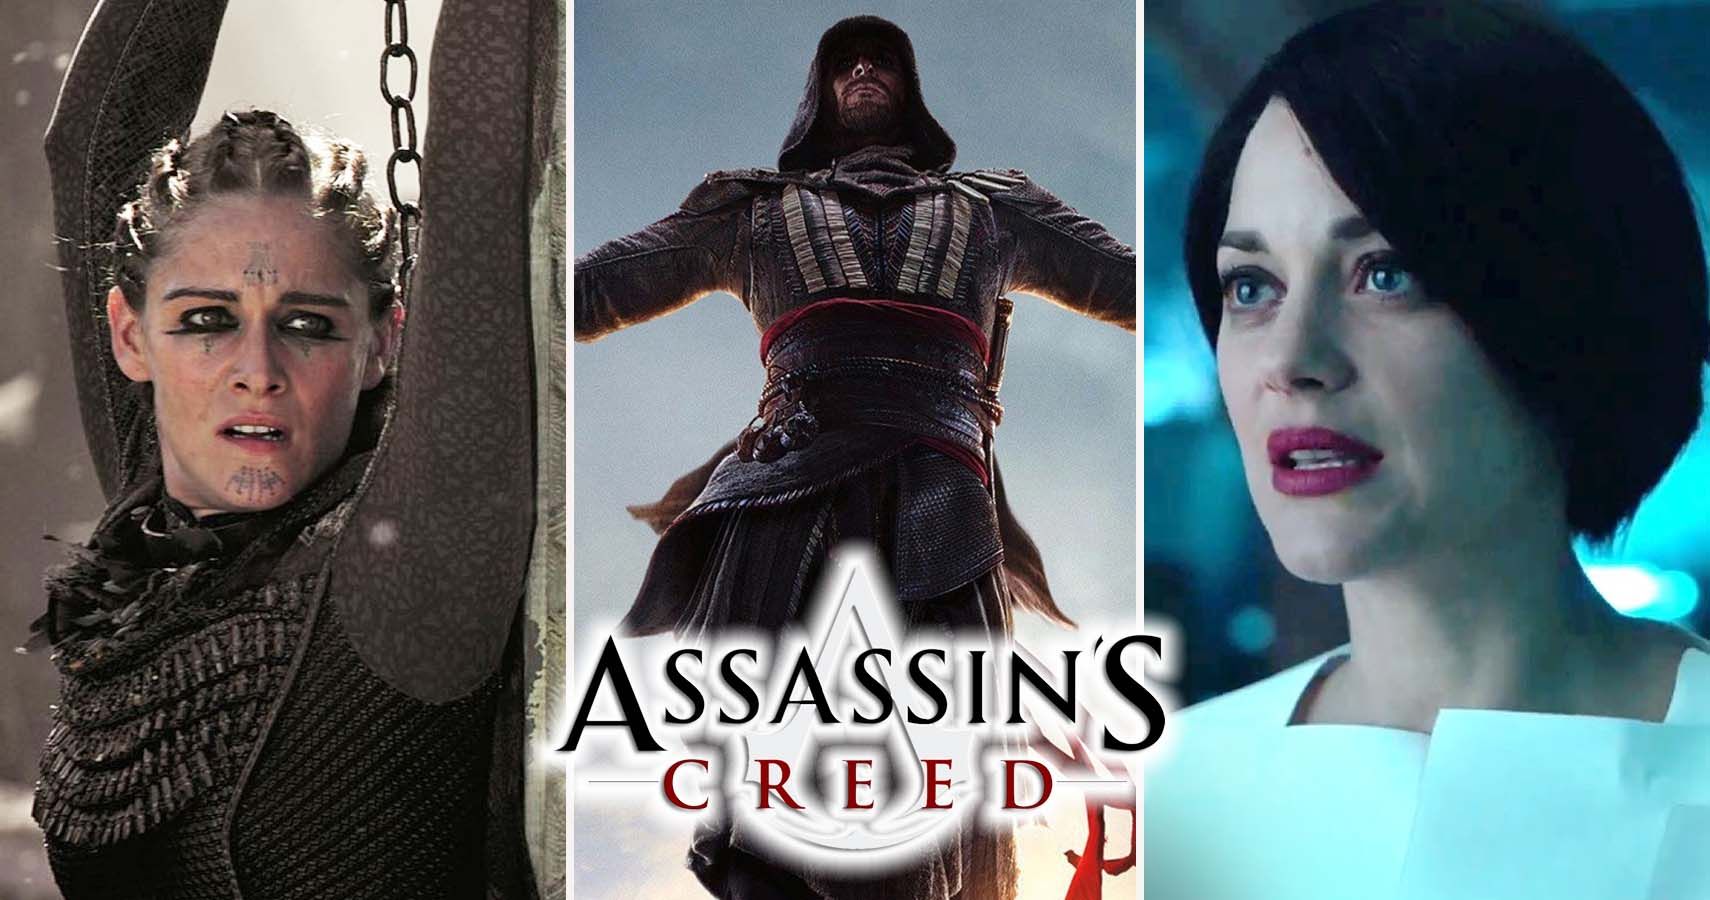 WTF Happened to Assassin's Creed (2016)?